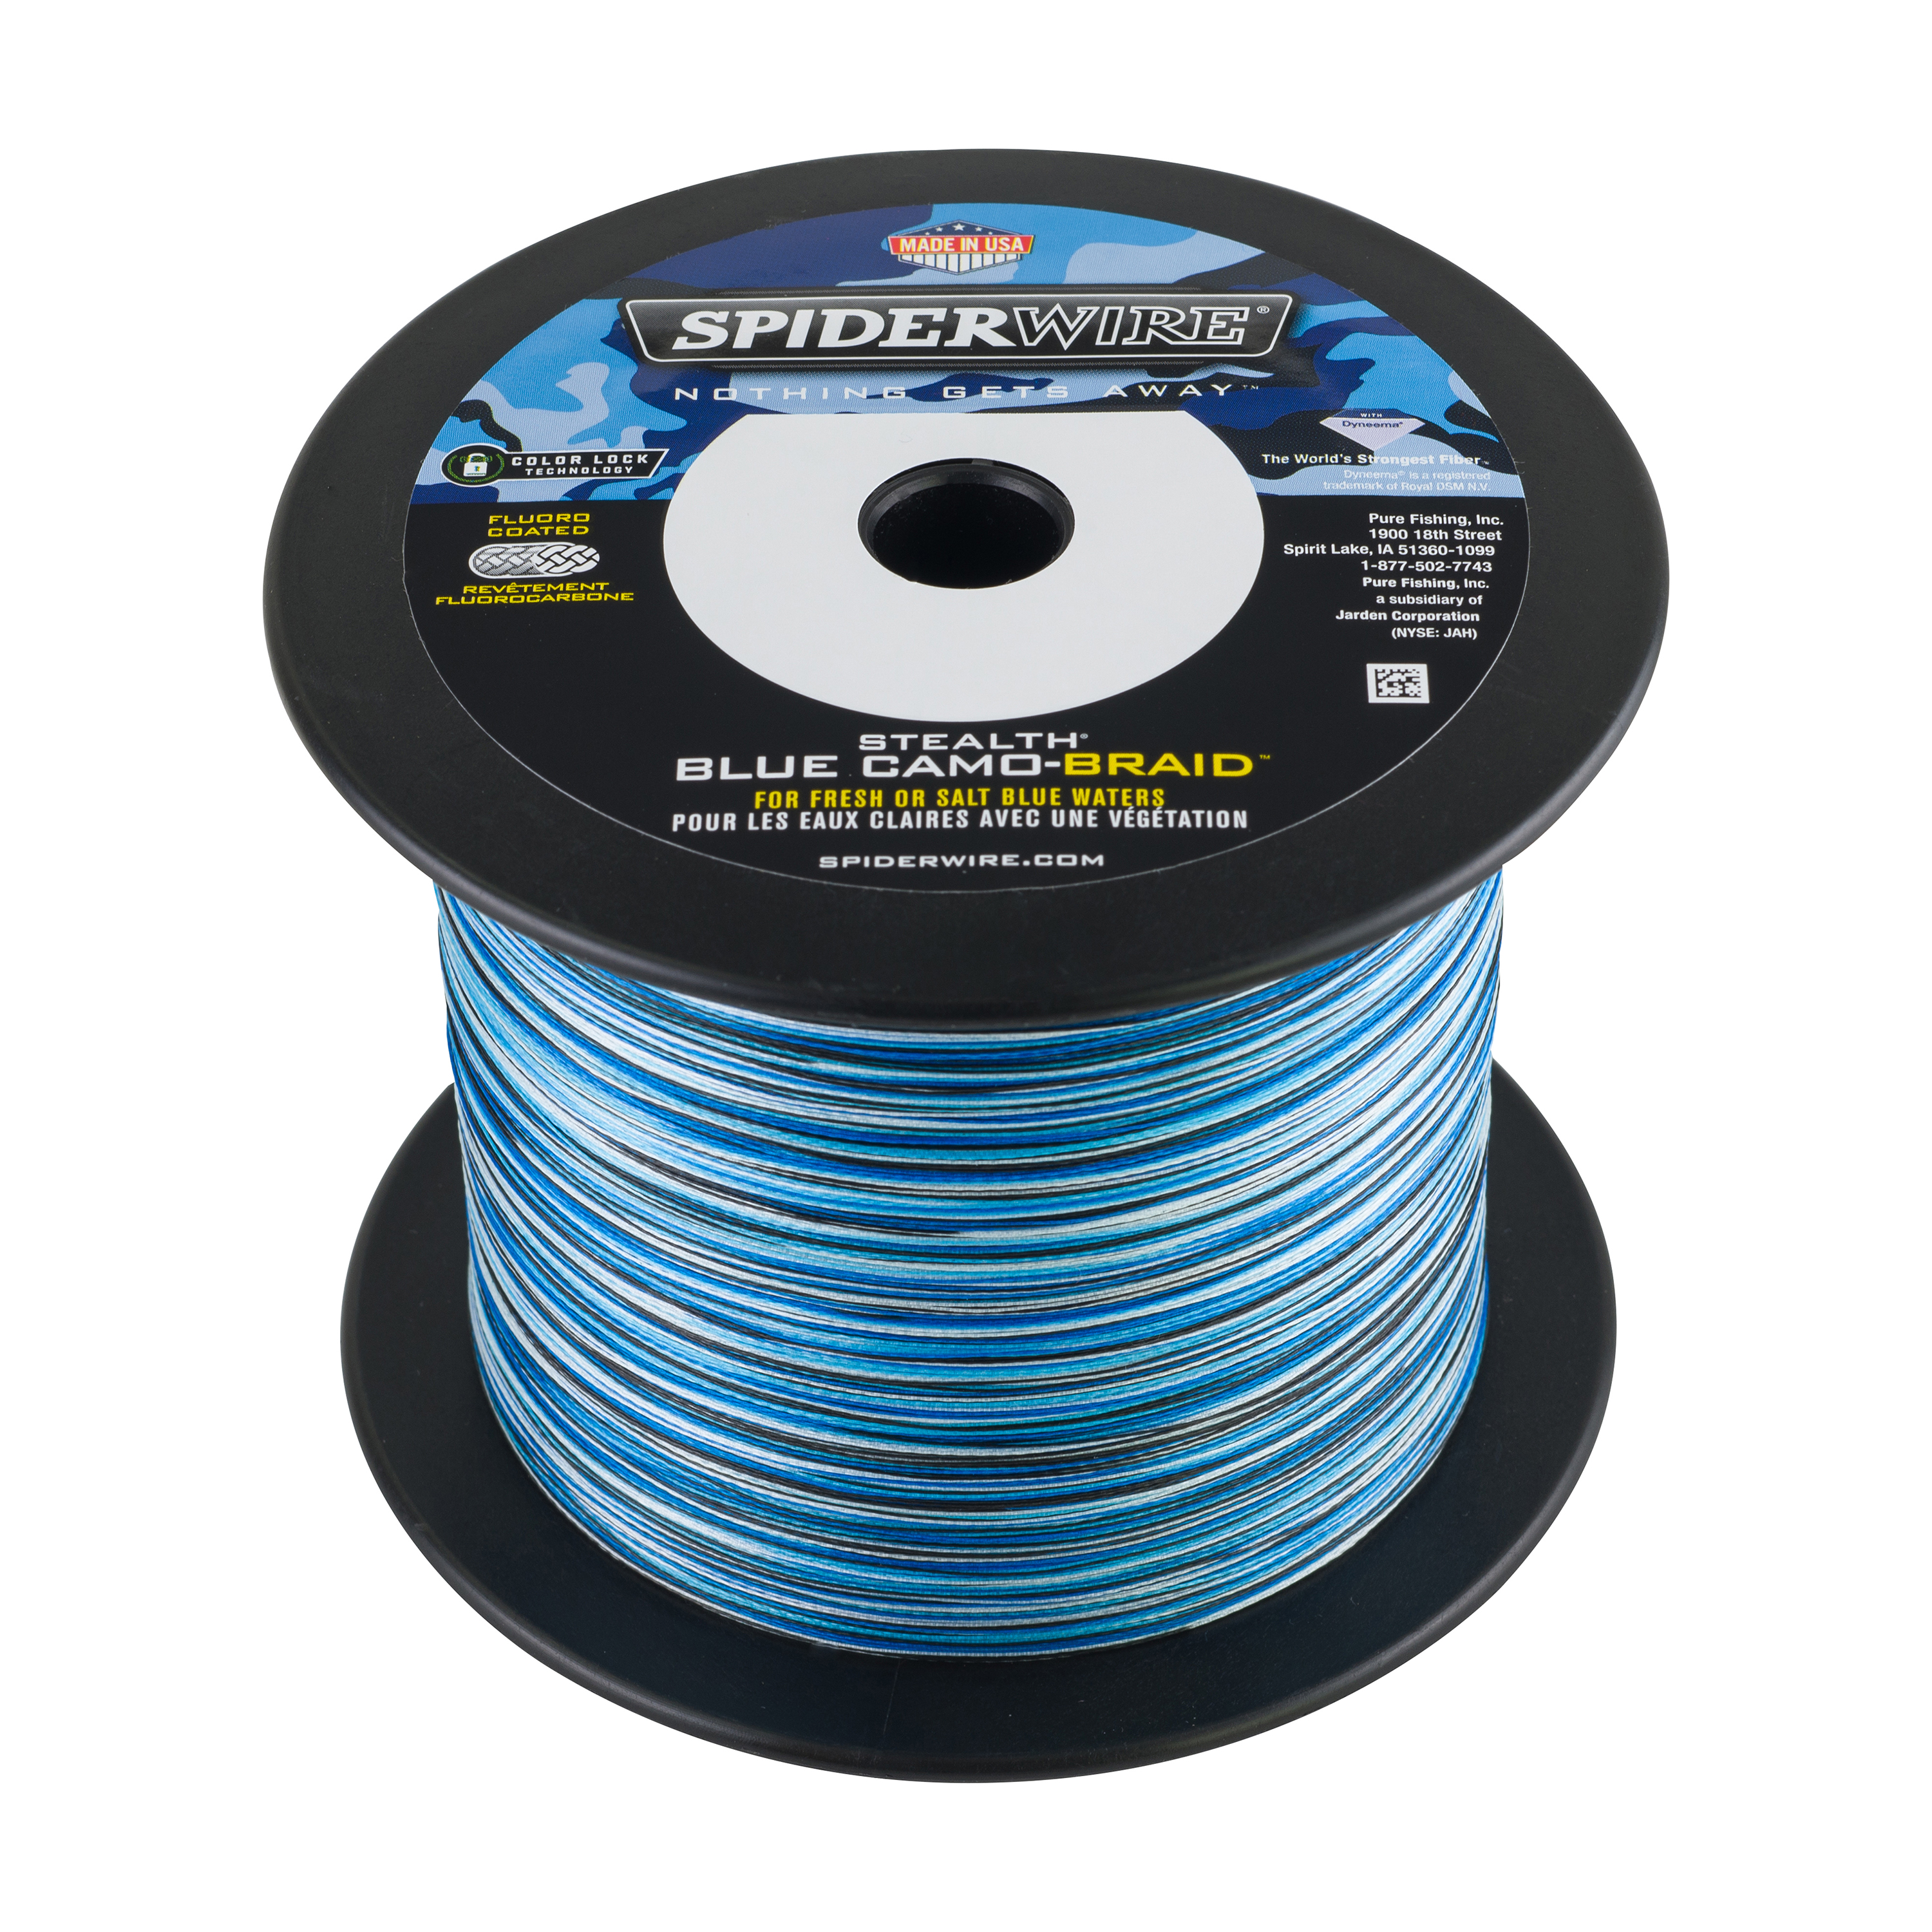 https://op2.0ps.us/original/opplanet-spiderwire-ss20bc-1500-stealth-camo-blue-20lb-1500yd-1370455